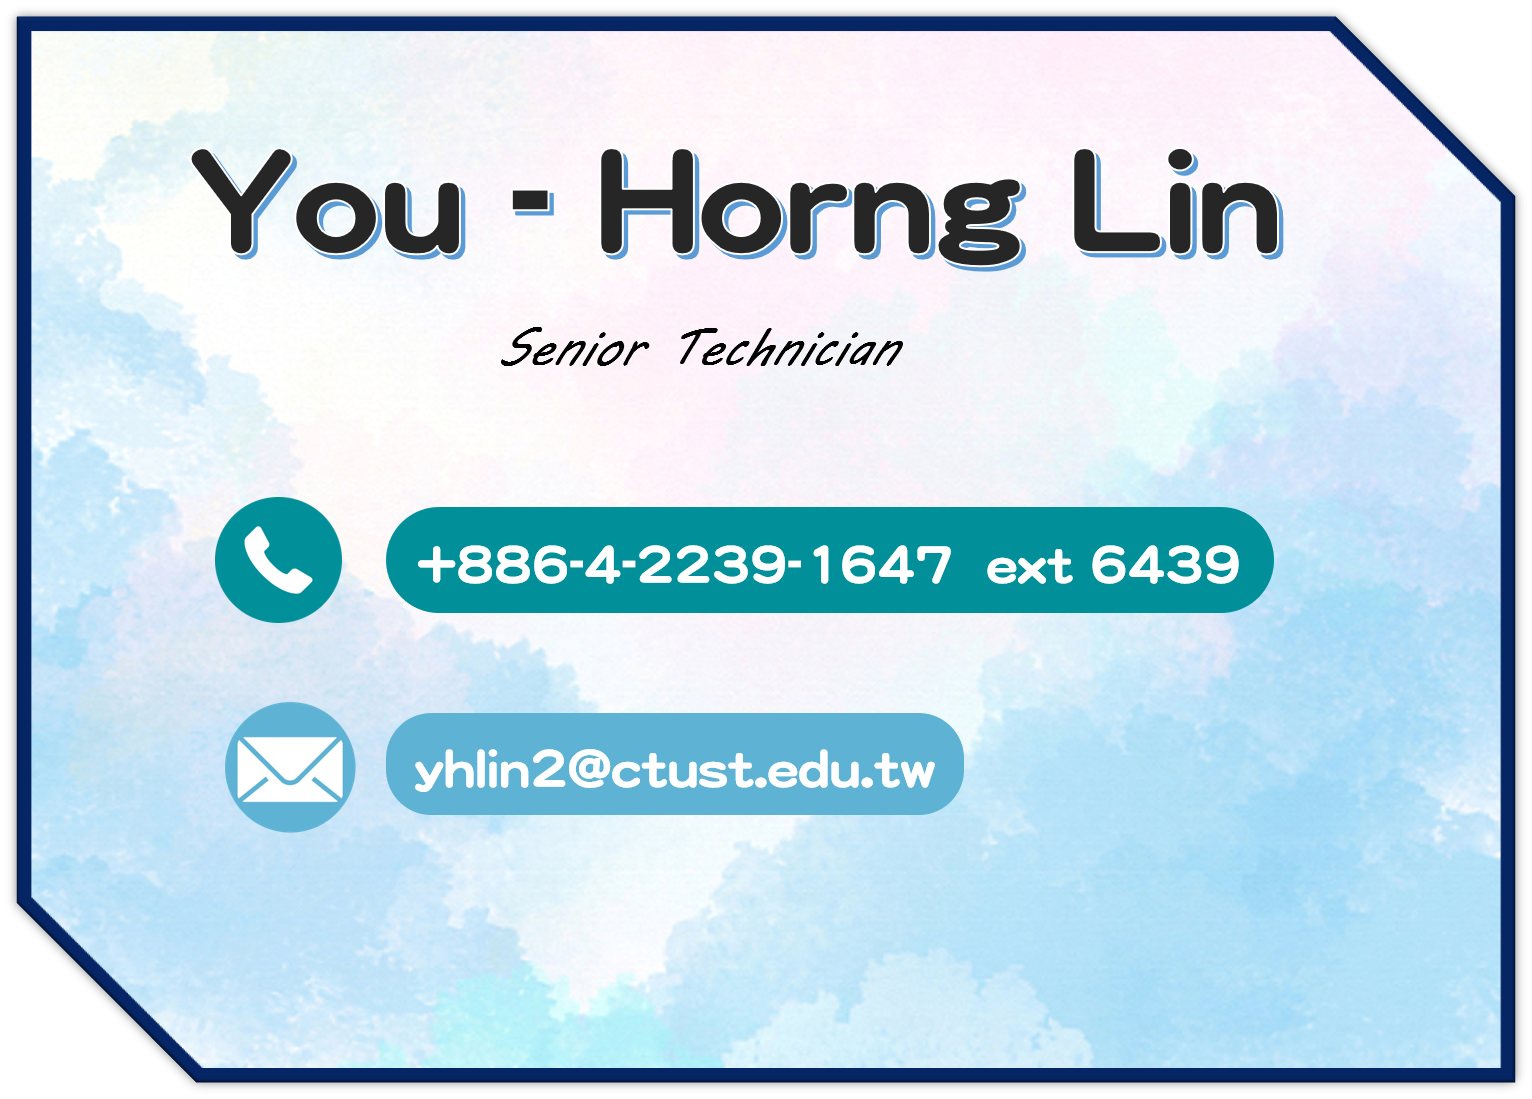 You - Horng Lin